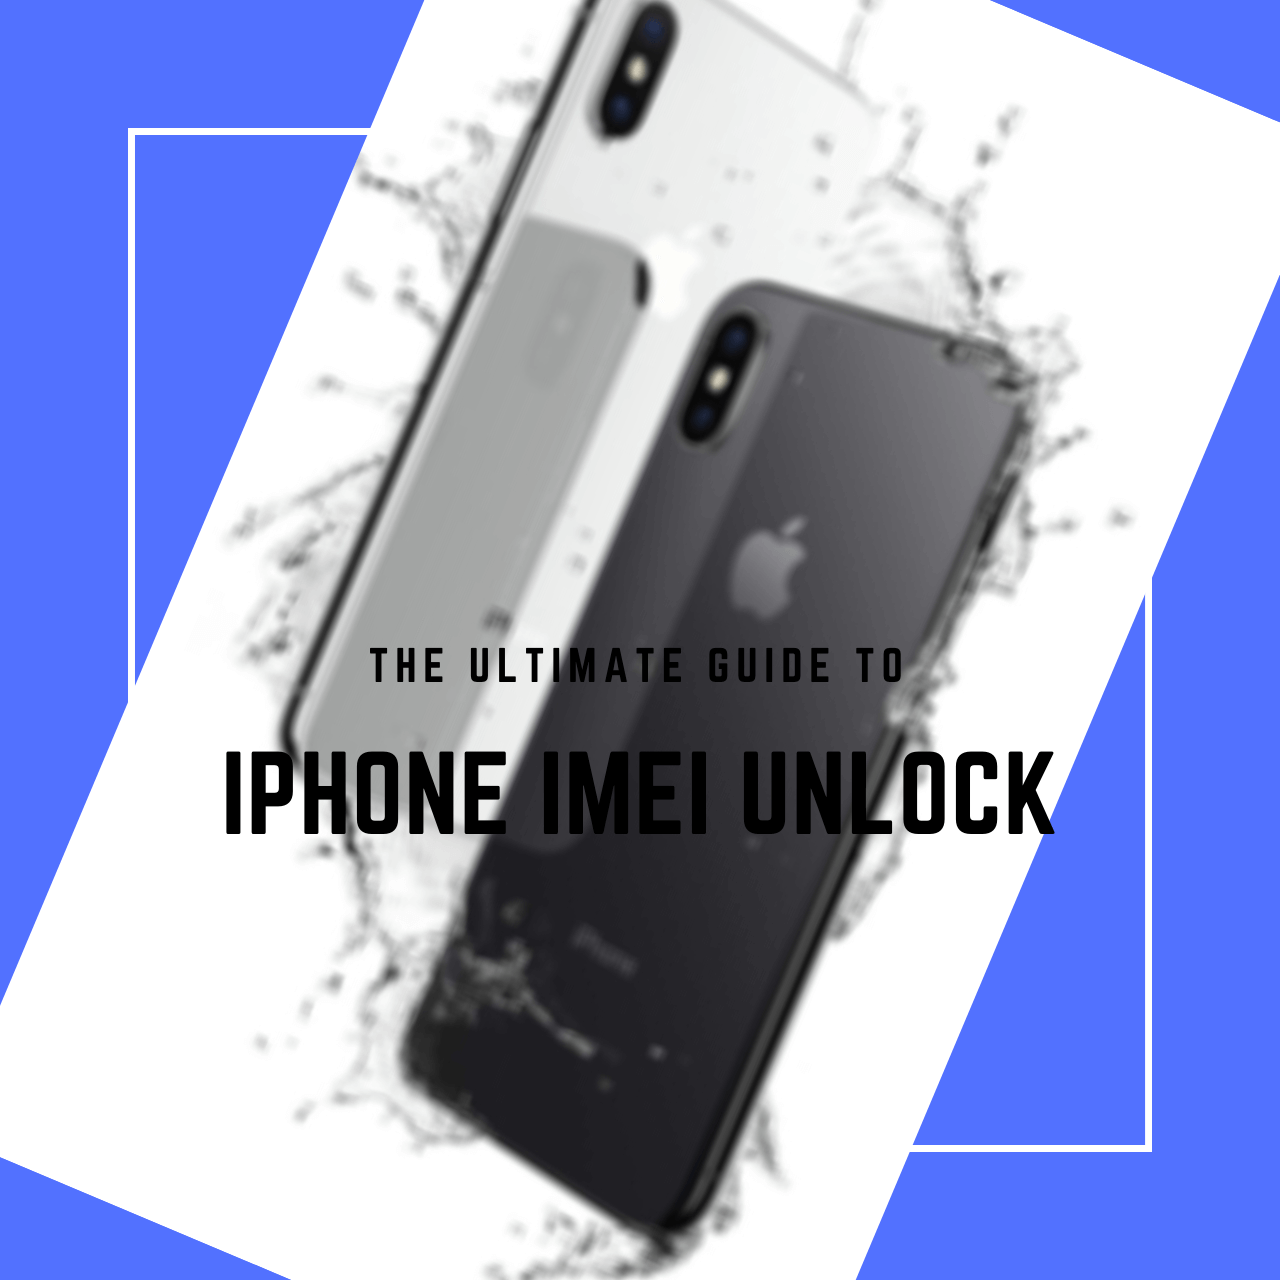 Completely free iphone imei unlock online